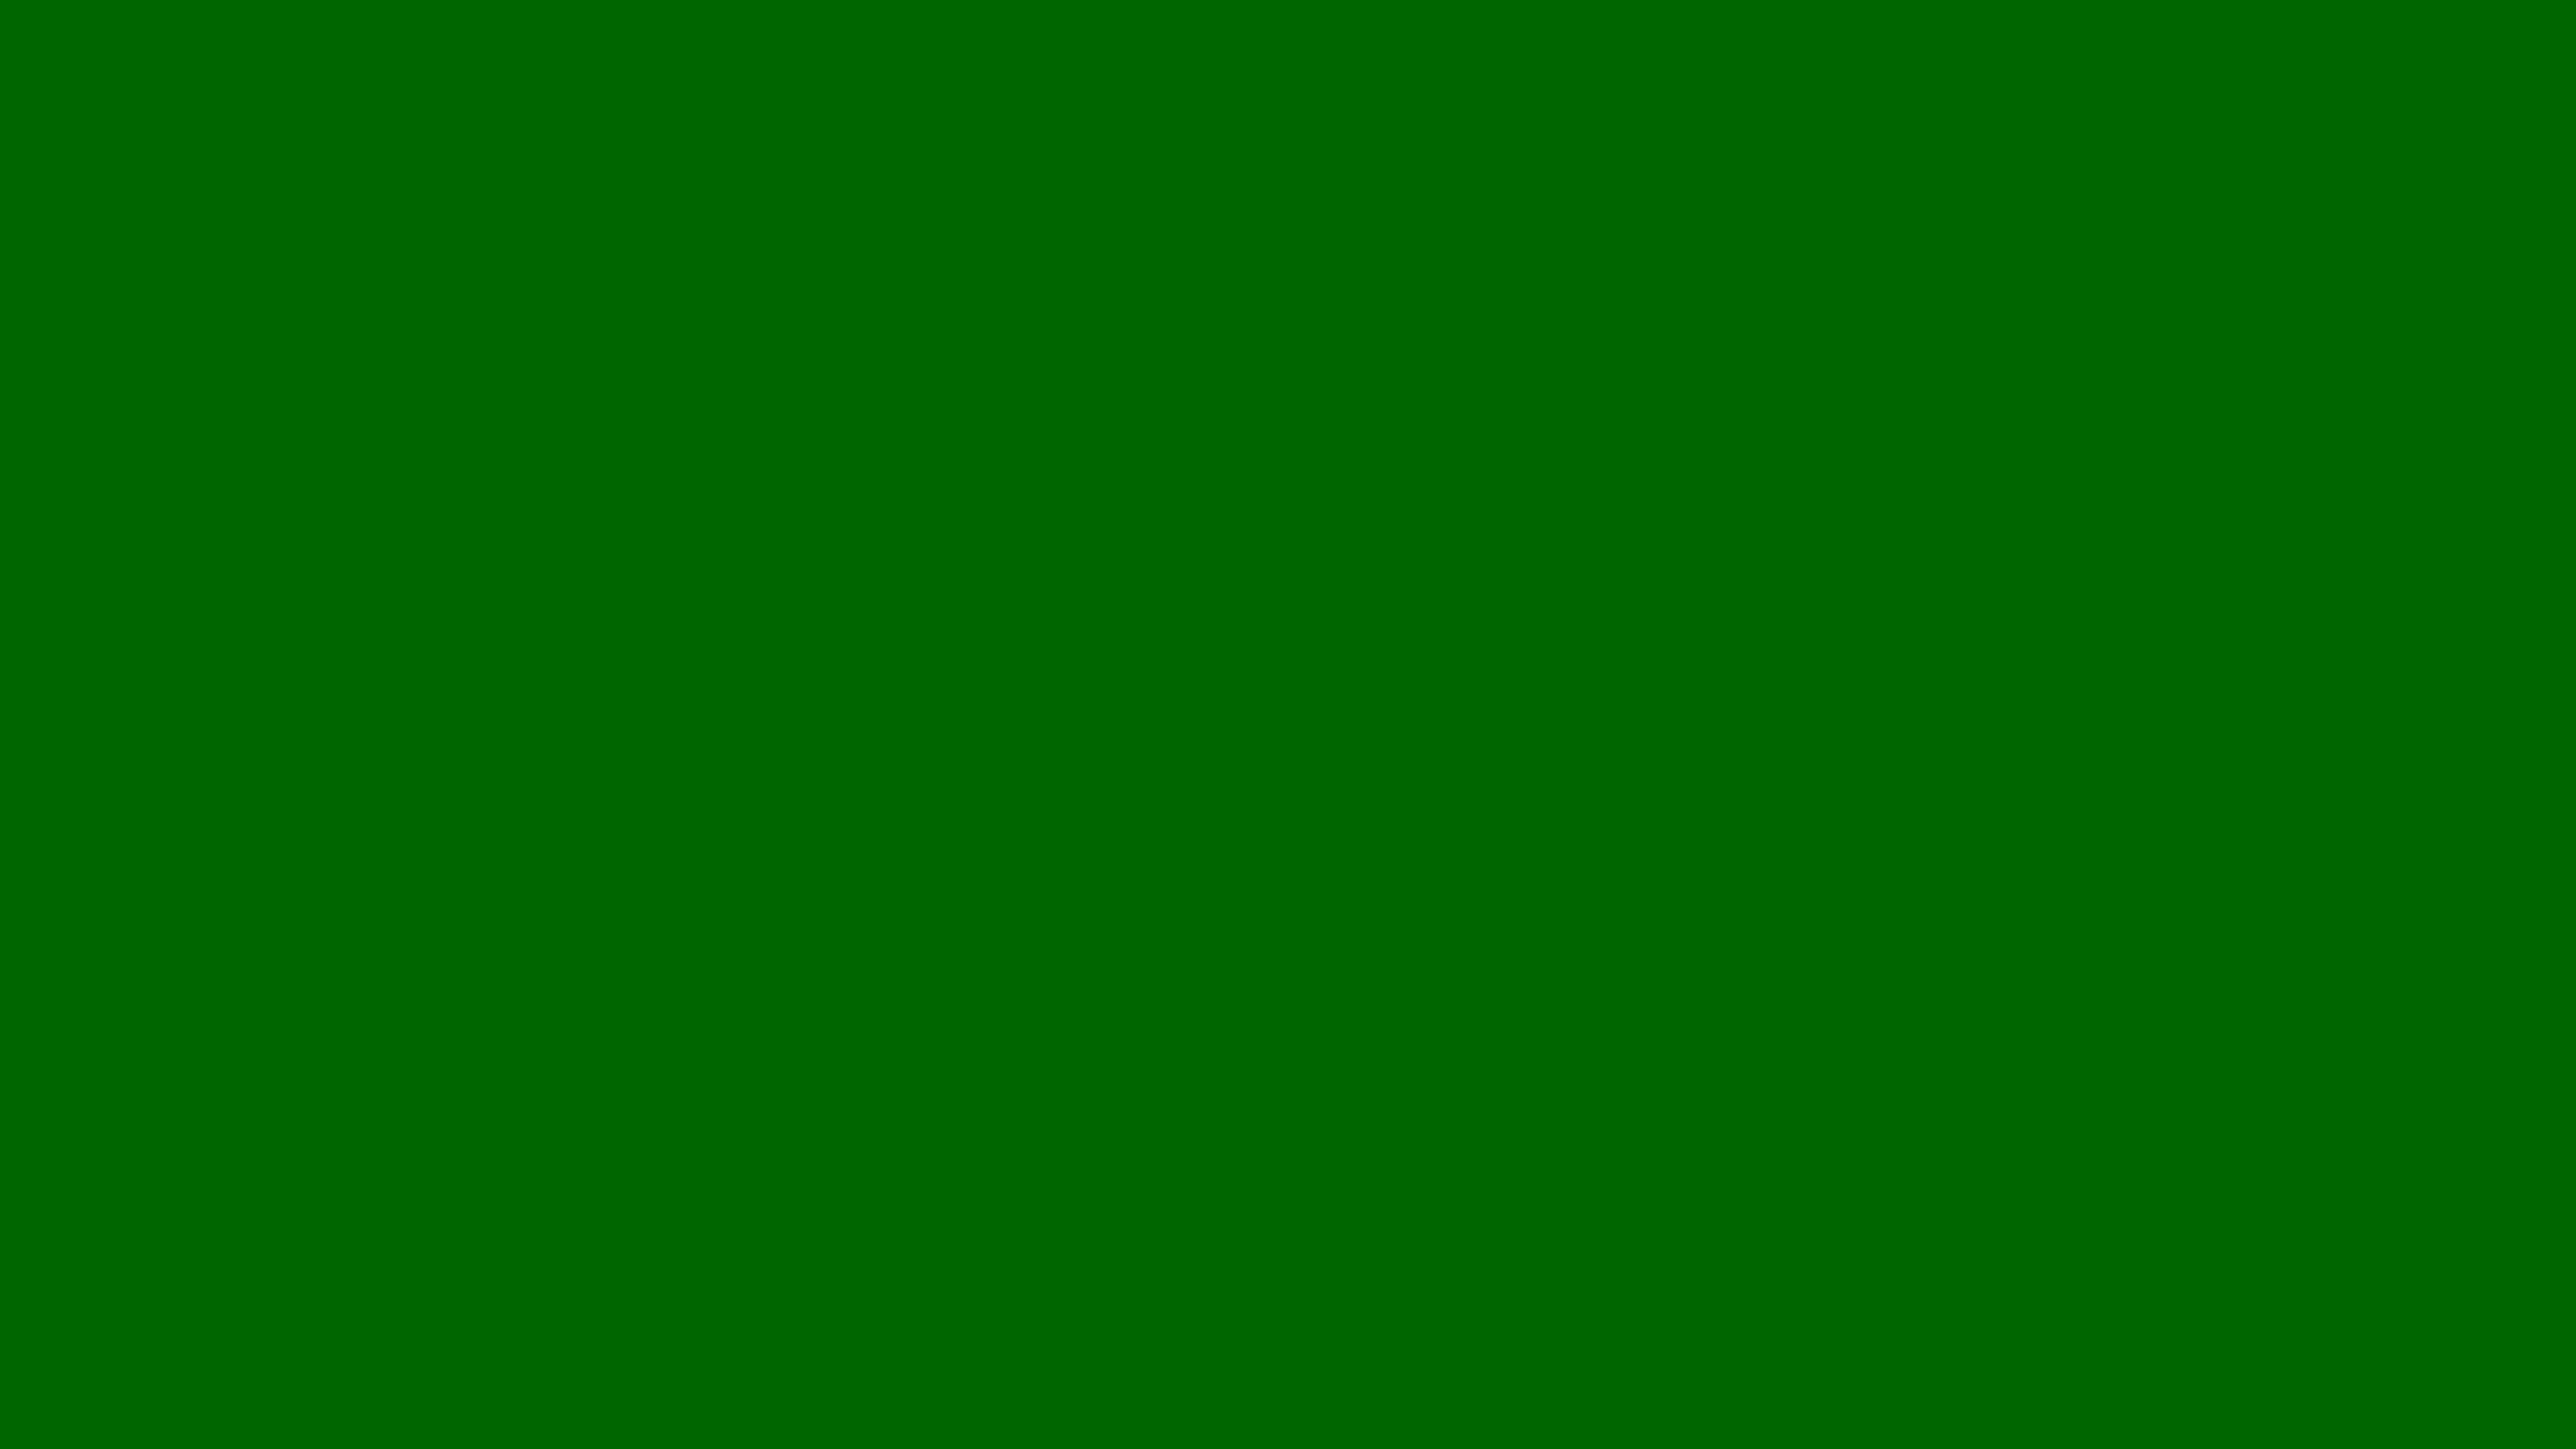 7680x4320 Pakistan Green Solid Color Background